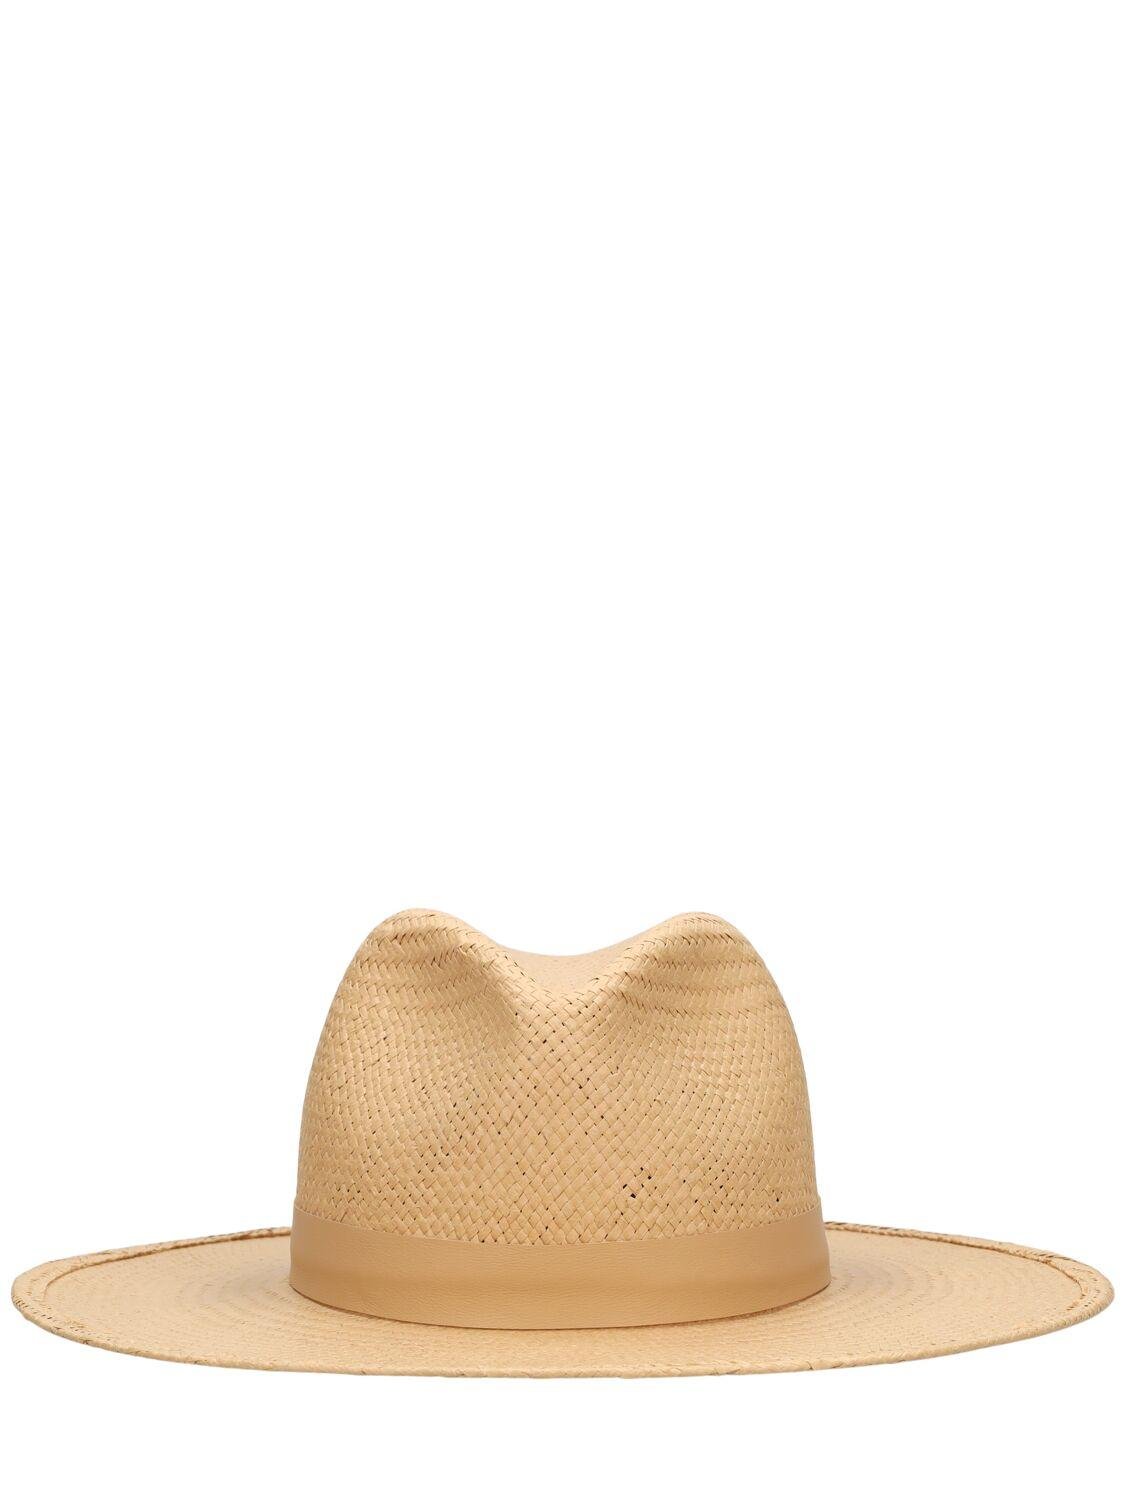 Simone Packable Fedora Hat by JANESSA LEONE